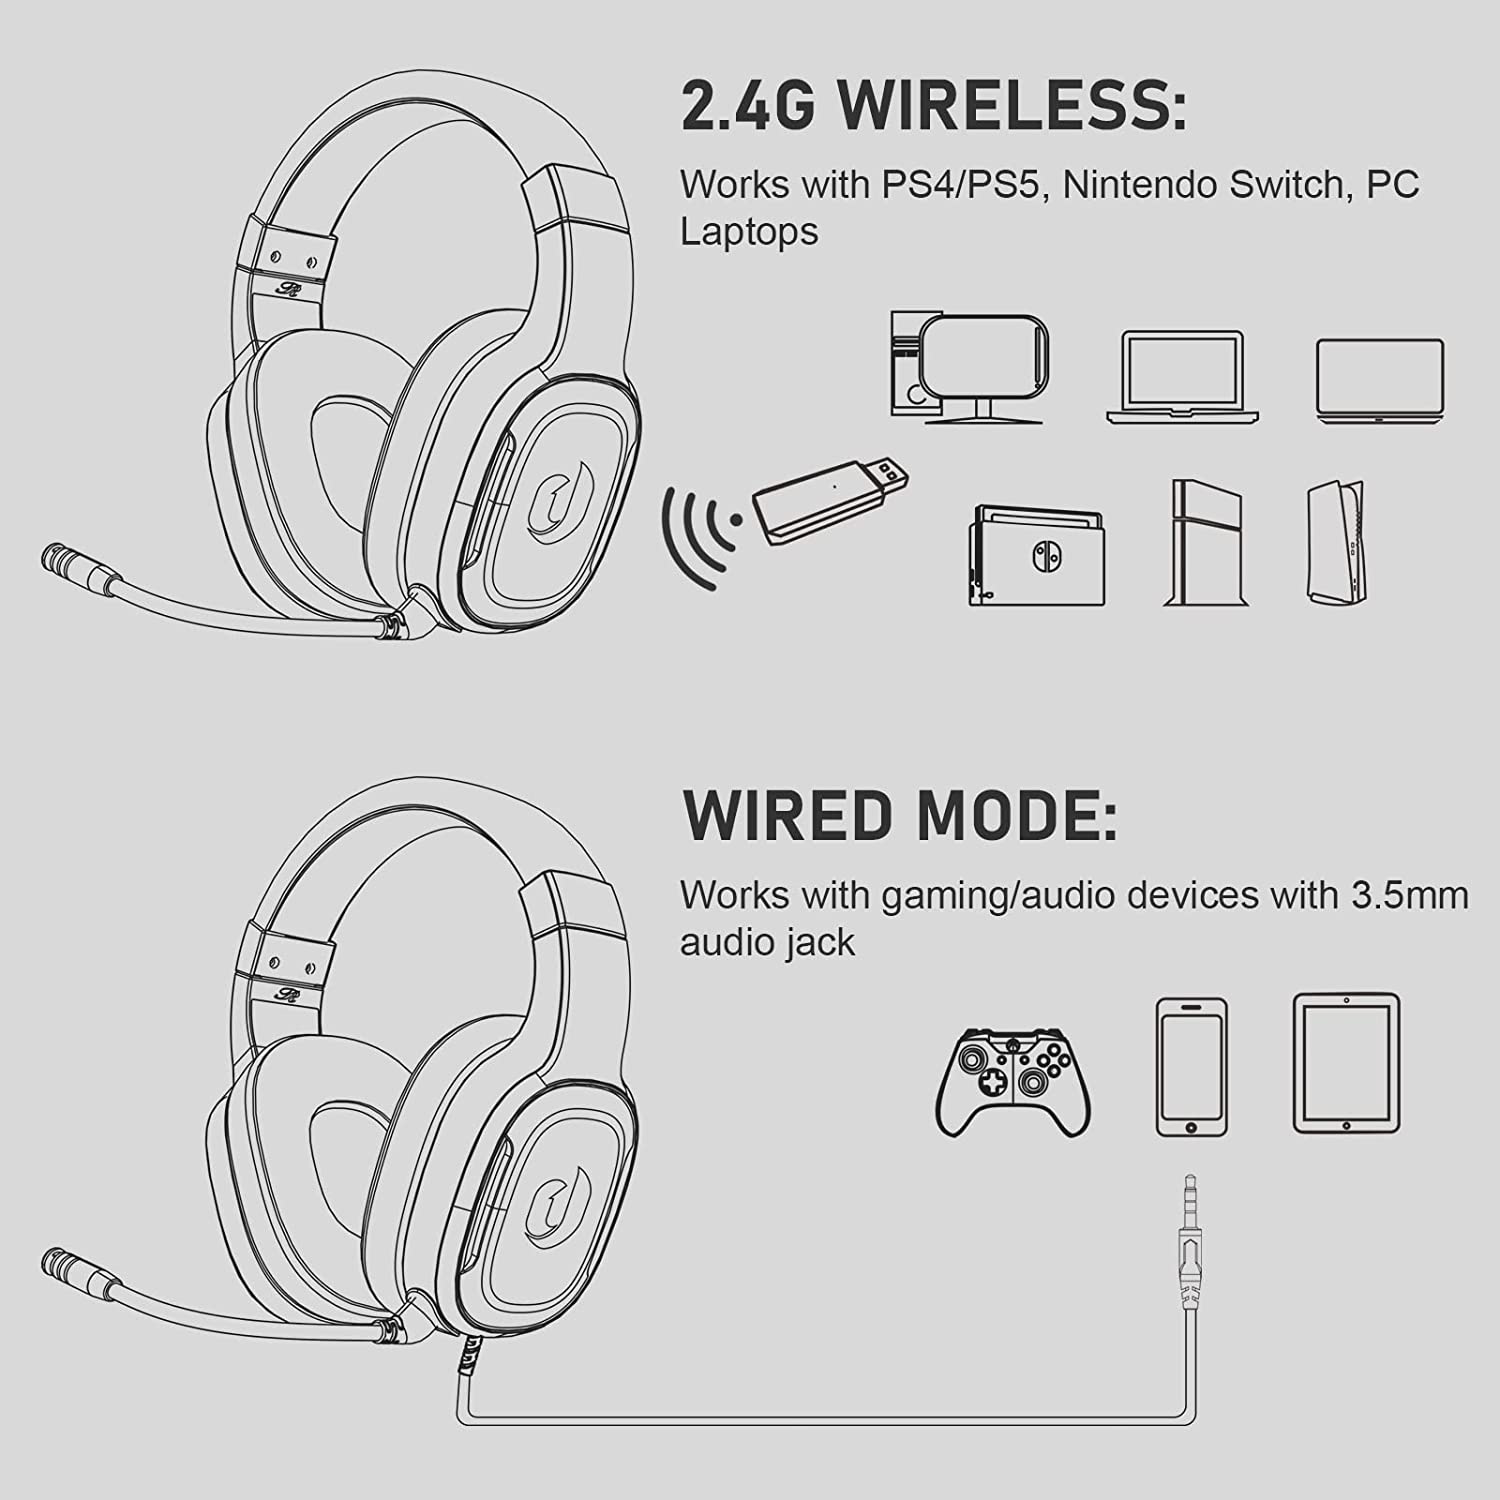 Jeecoo G80 Wireless Gaming Headset - 7.1 Surround Sound, Detachable Noise Canceling Mic, Low Latency 2.4GHz Wireless Gaming Headphones, Shining RGB - Works with PS4 PS5 PC Laptop Computers